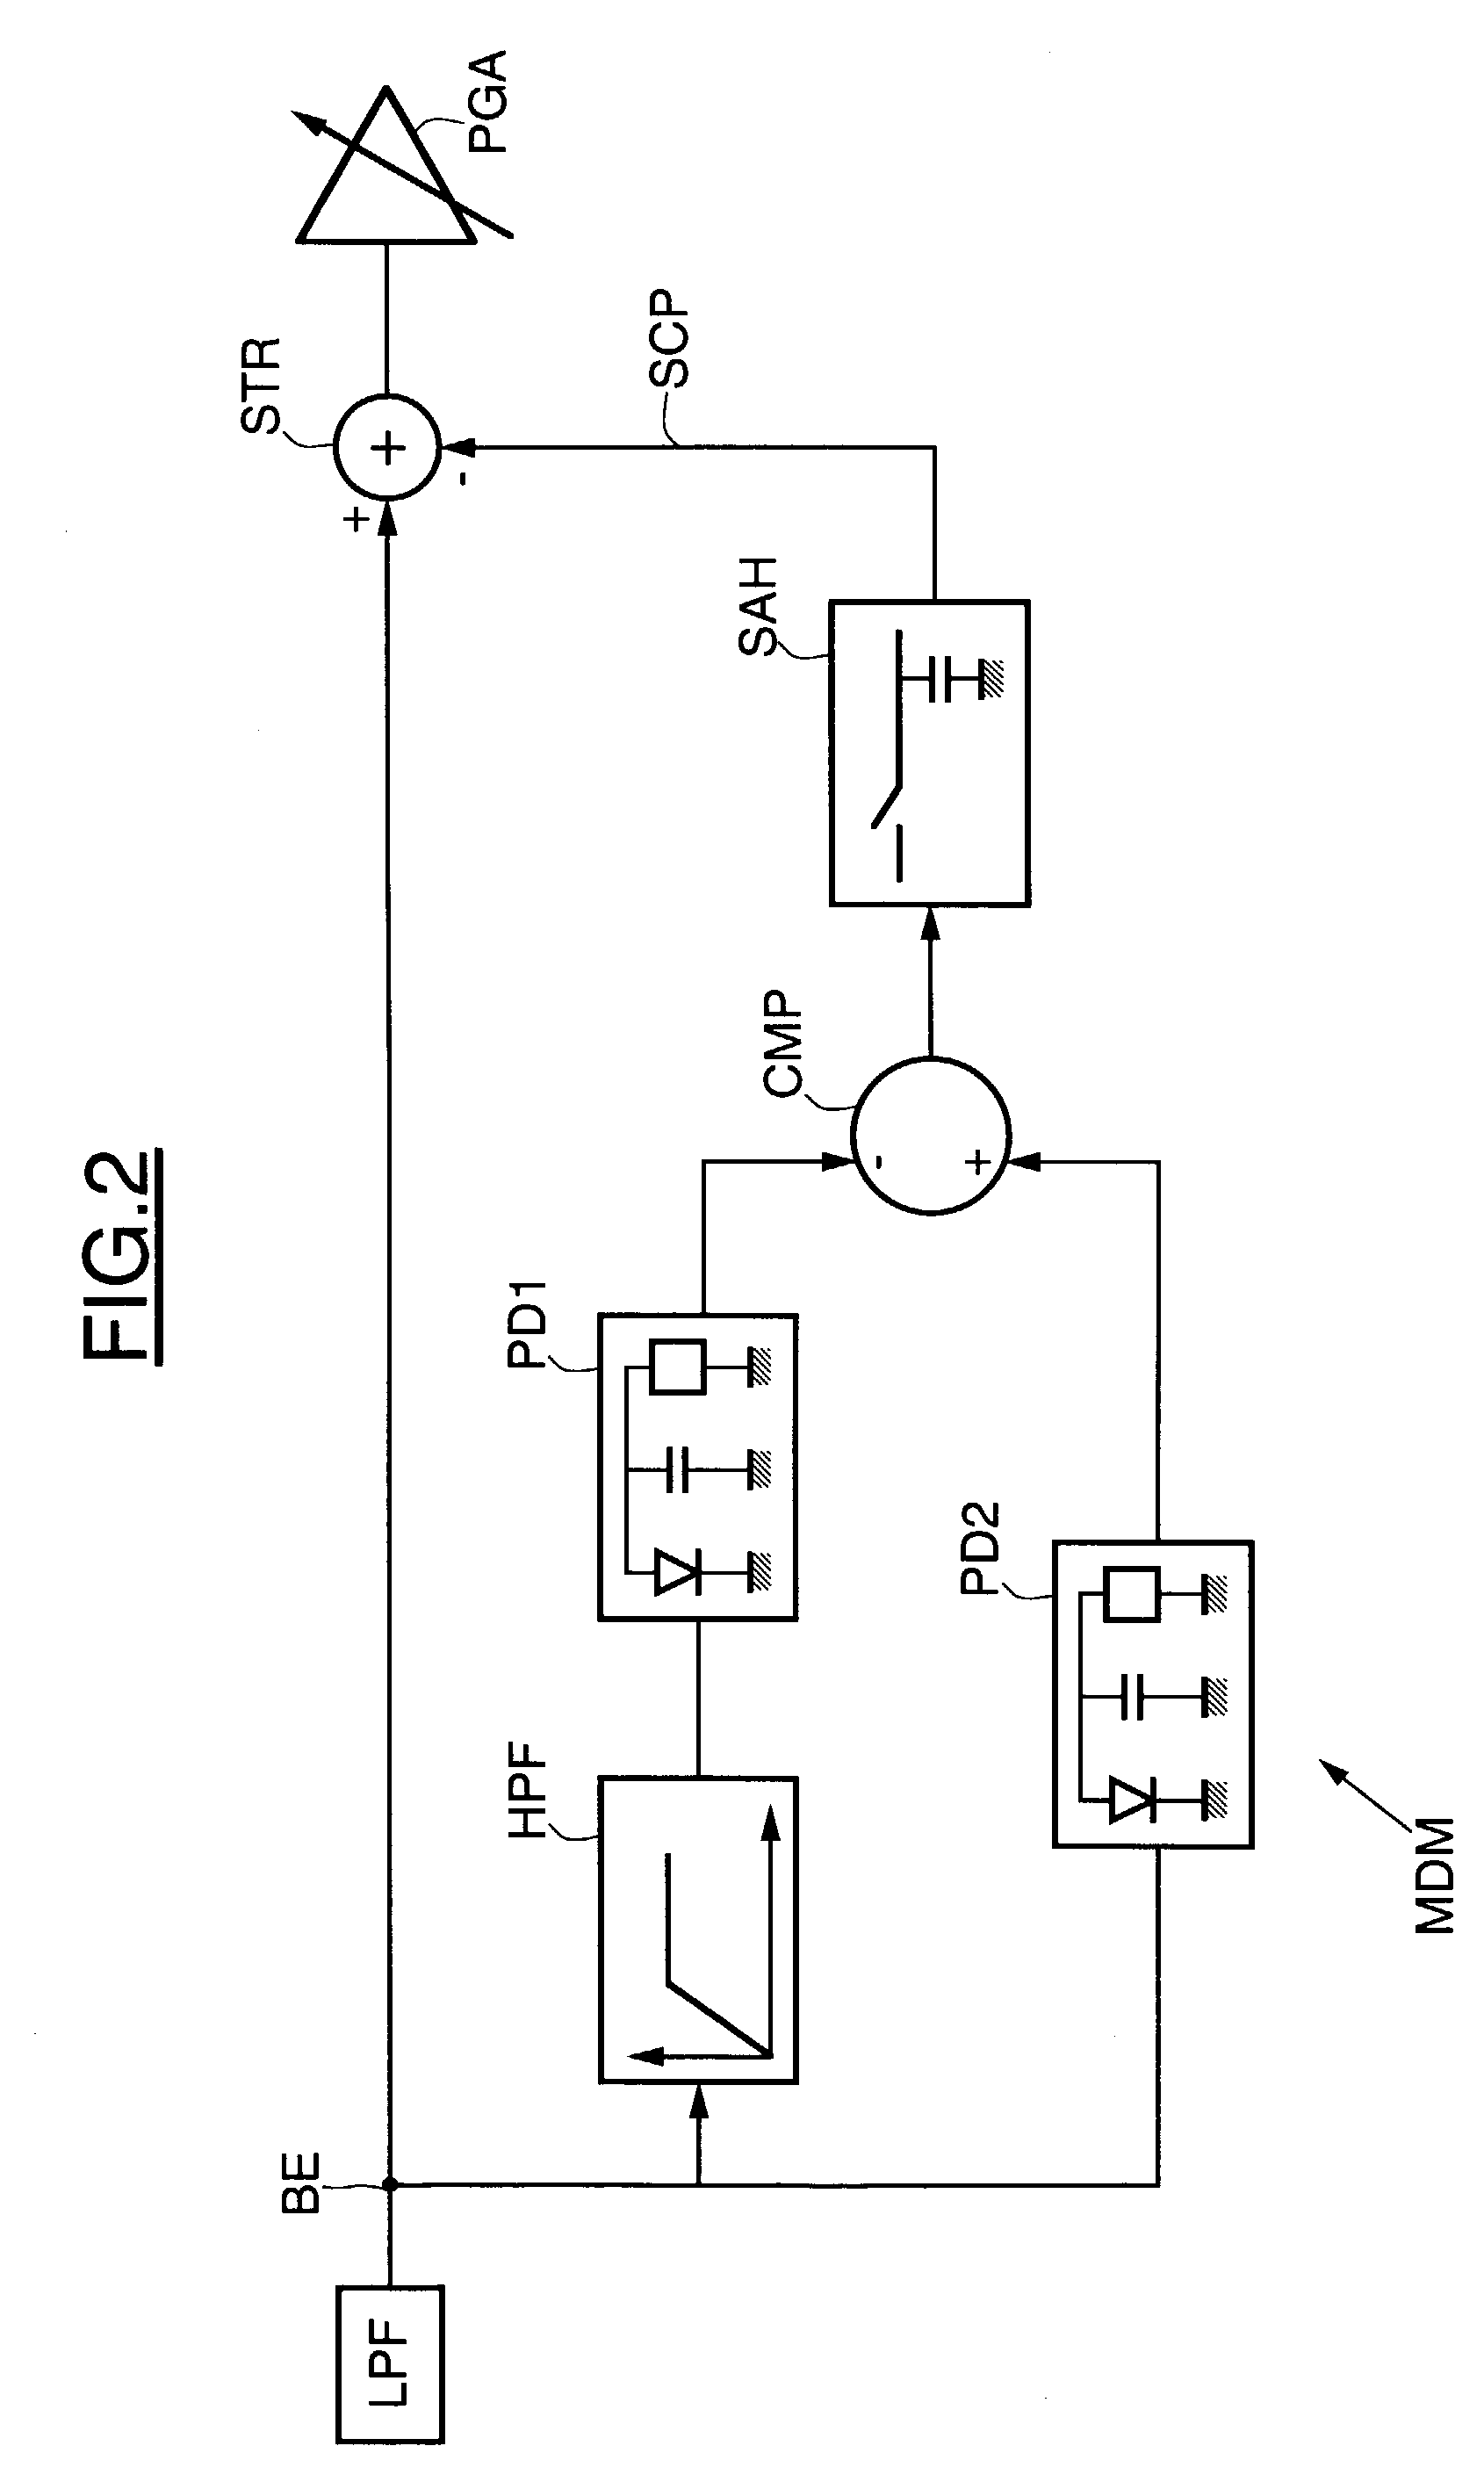 Direct-conversion receiver for a communication system using a modulation with non-constant envelope